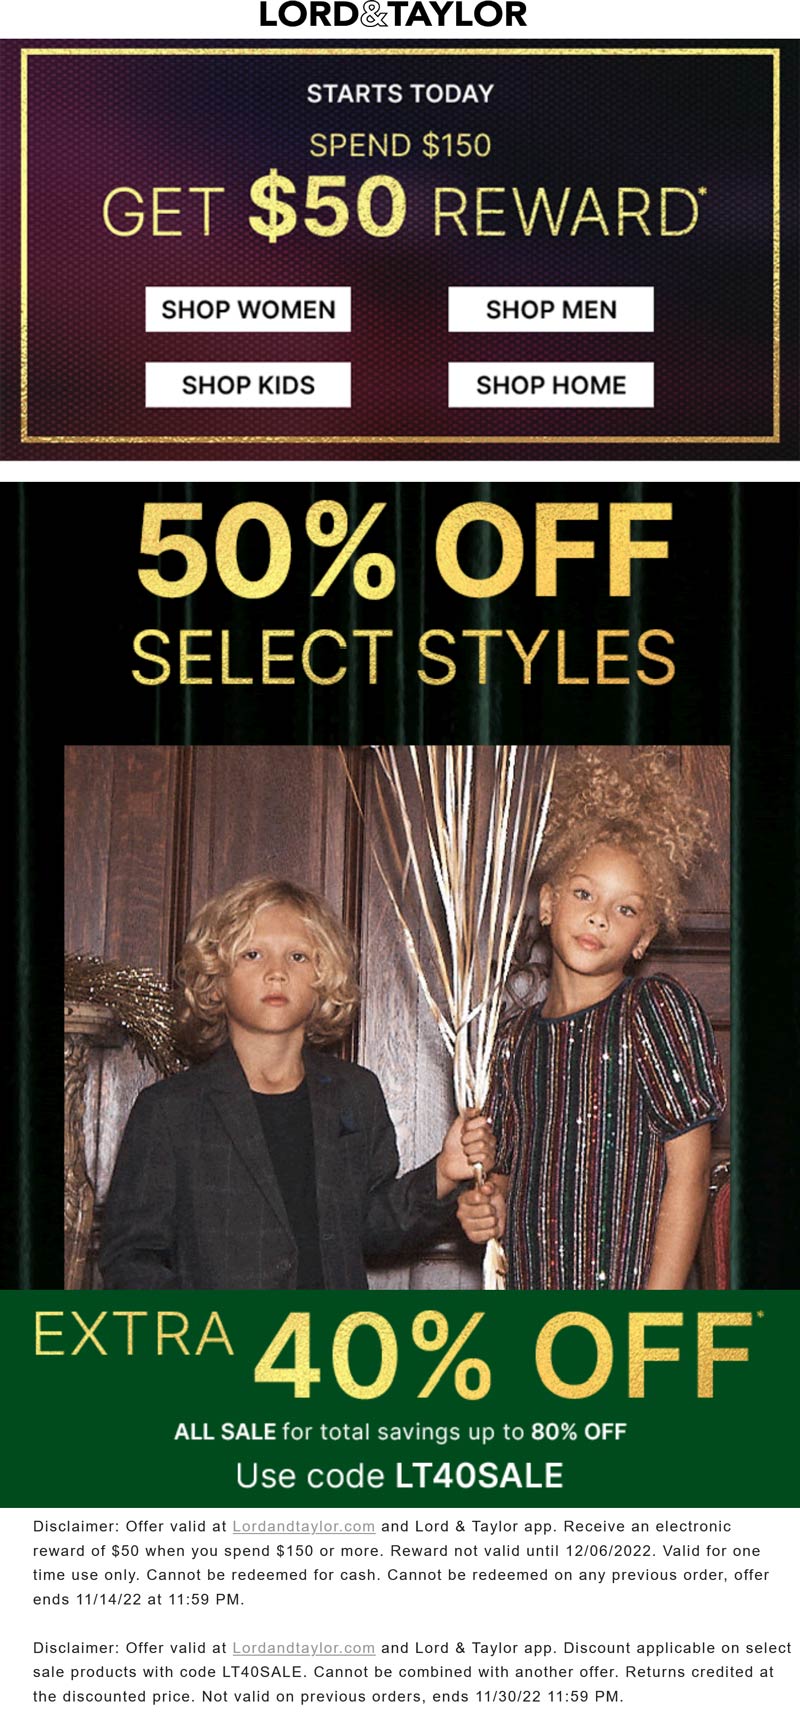 Lord & Taylor stores Coupon  Extra 40% off sale items at Lord & Taylor via promo code LT40SALE #lordtaylor 